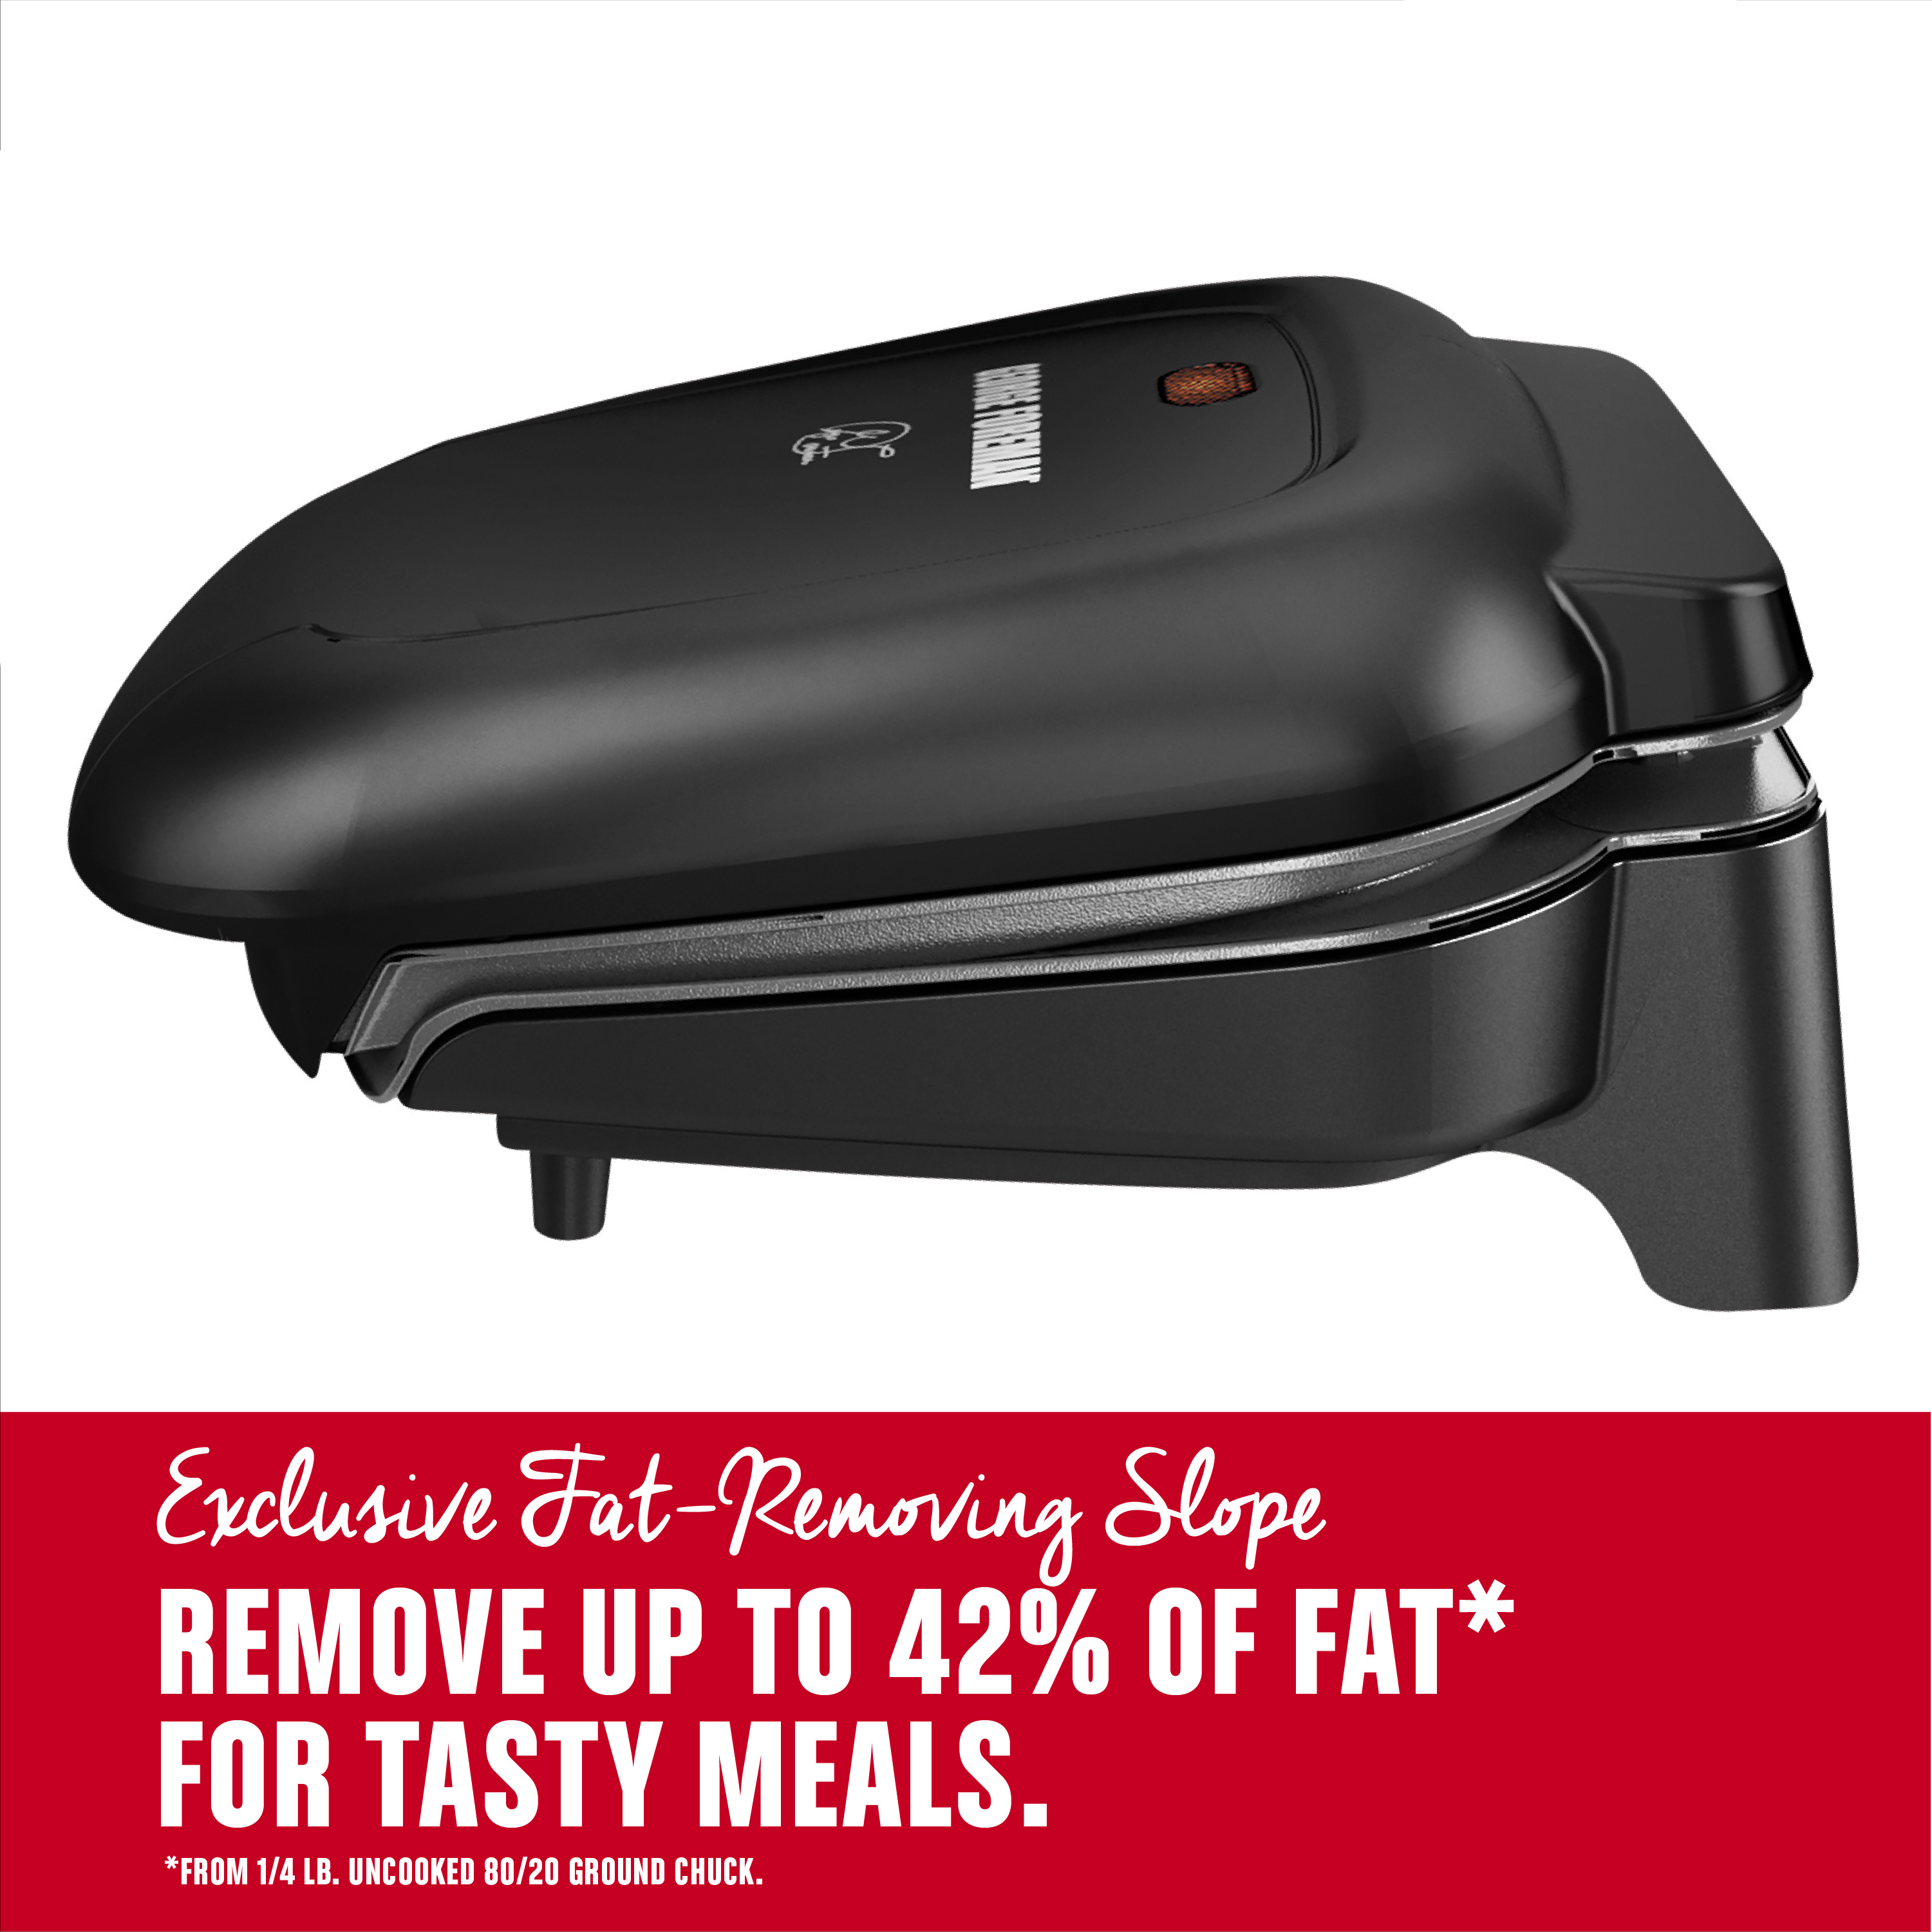 George Foreman 2-Serving Classic Plate Electric Indoor Grill and Panini Press, Black , GR0040B - image 4 of 7